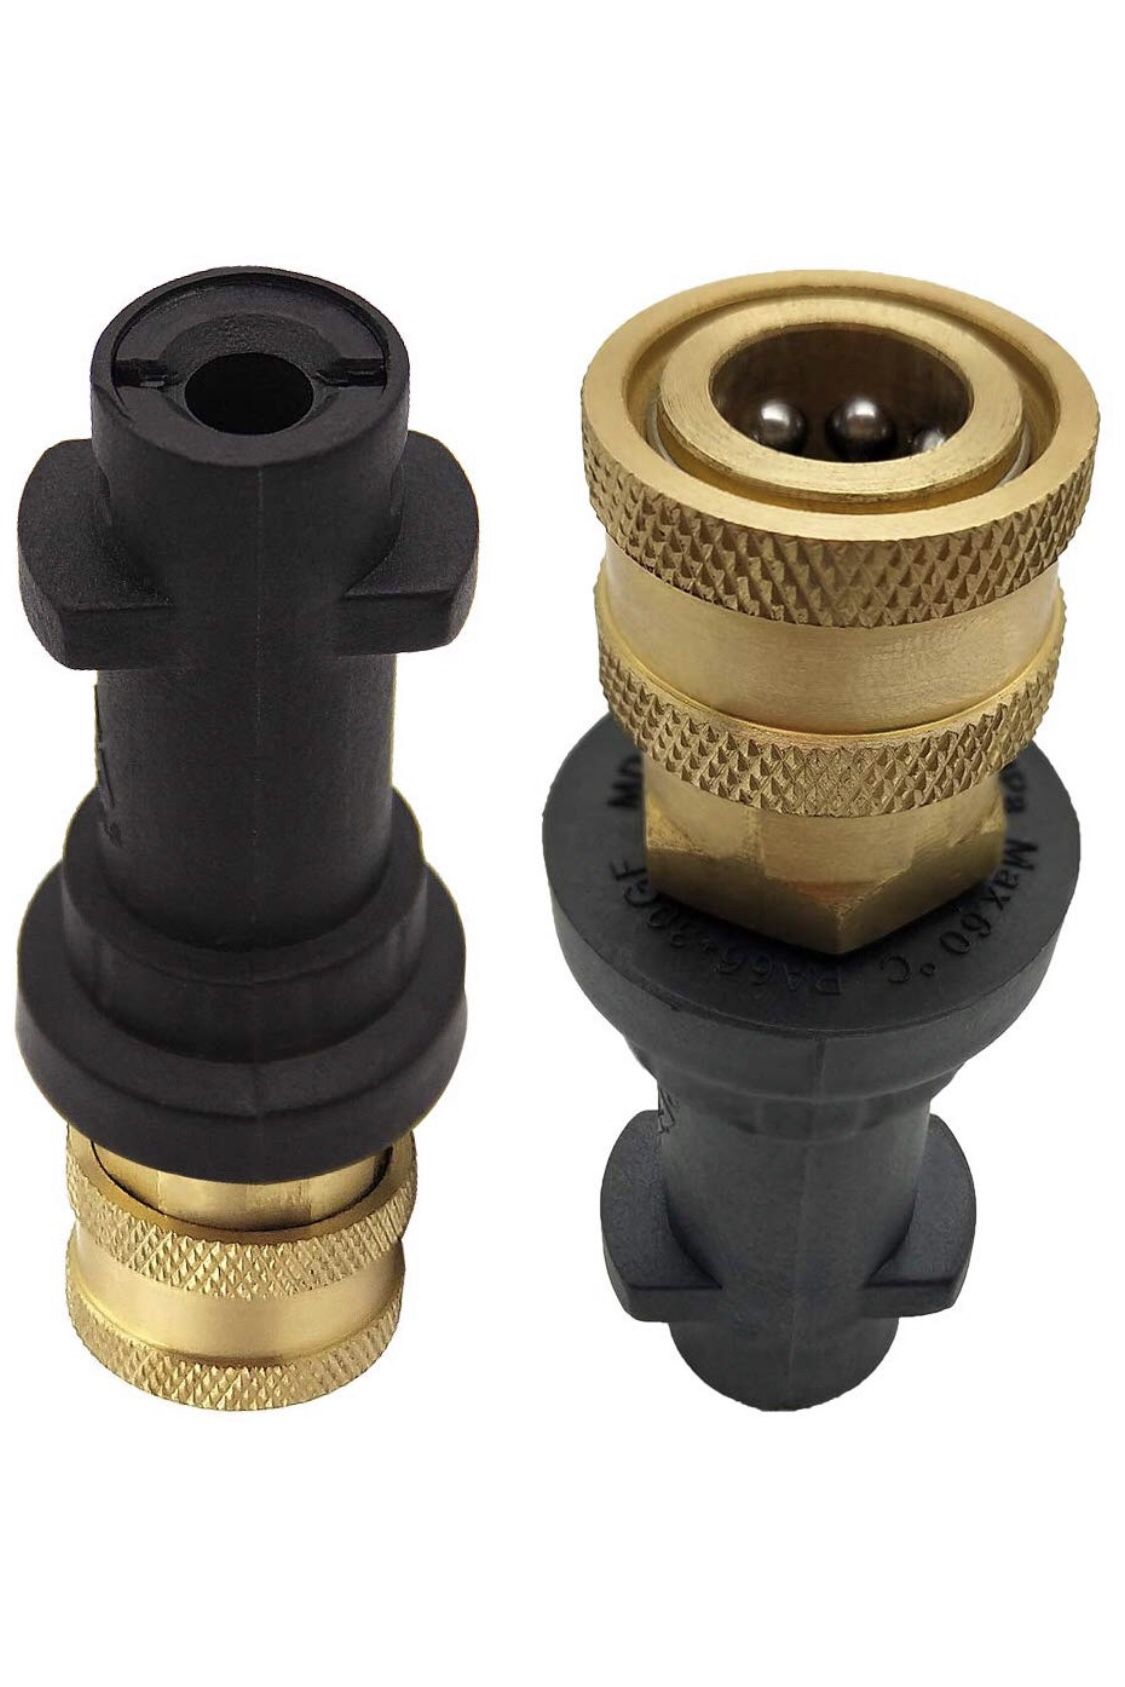 Brand-new!!! Pressure Washer Gun Adapter with 1/4" Female Quick Connect Fitting, Fit Karcher K Series